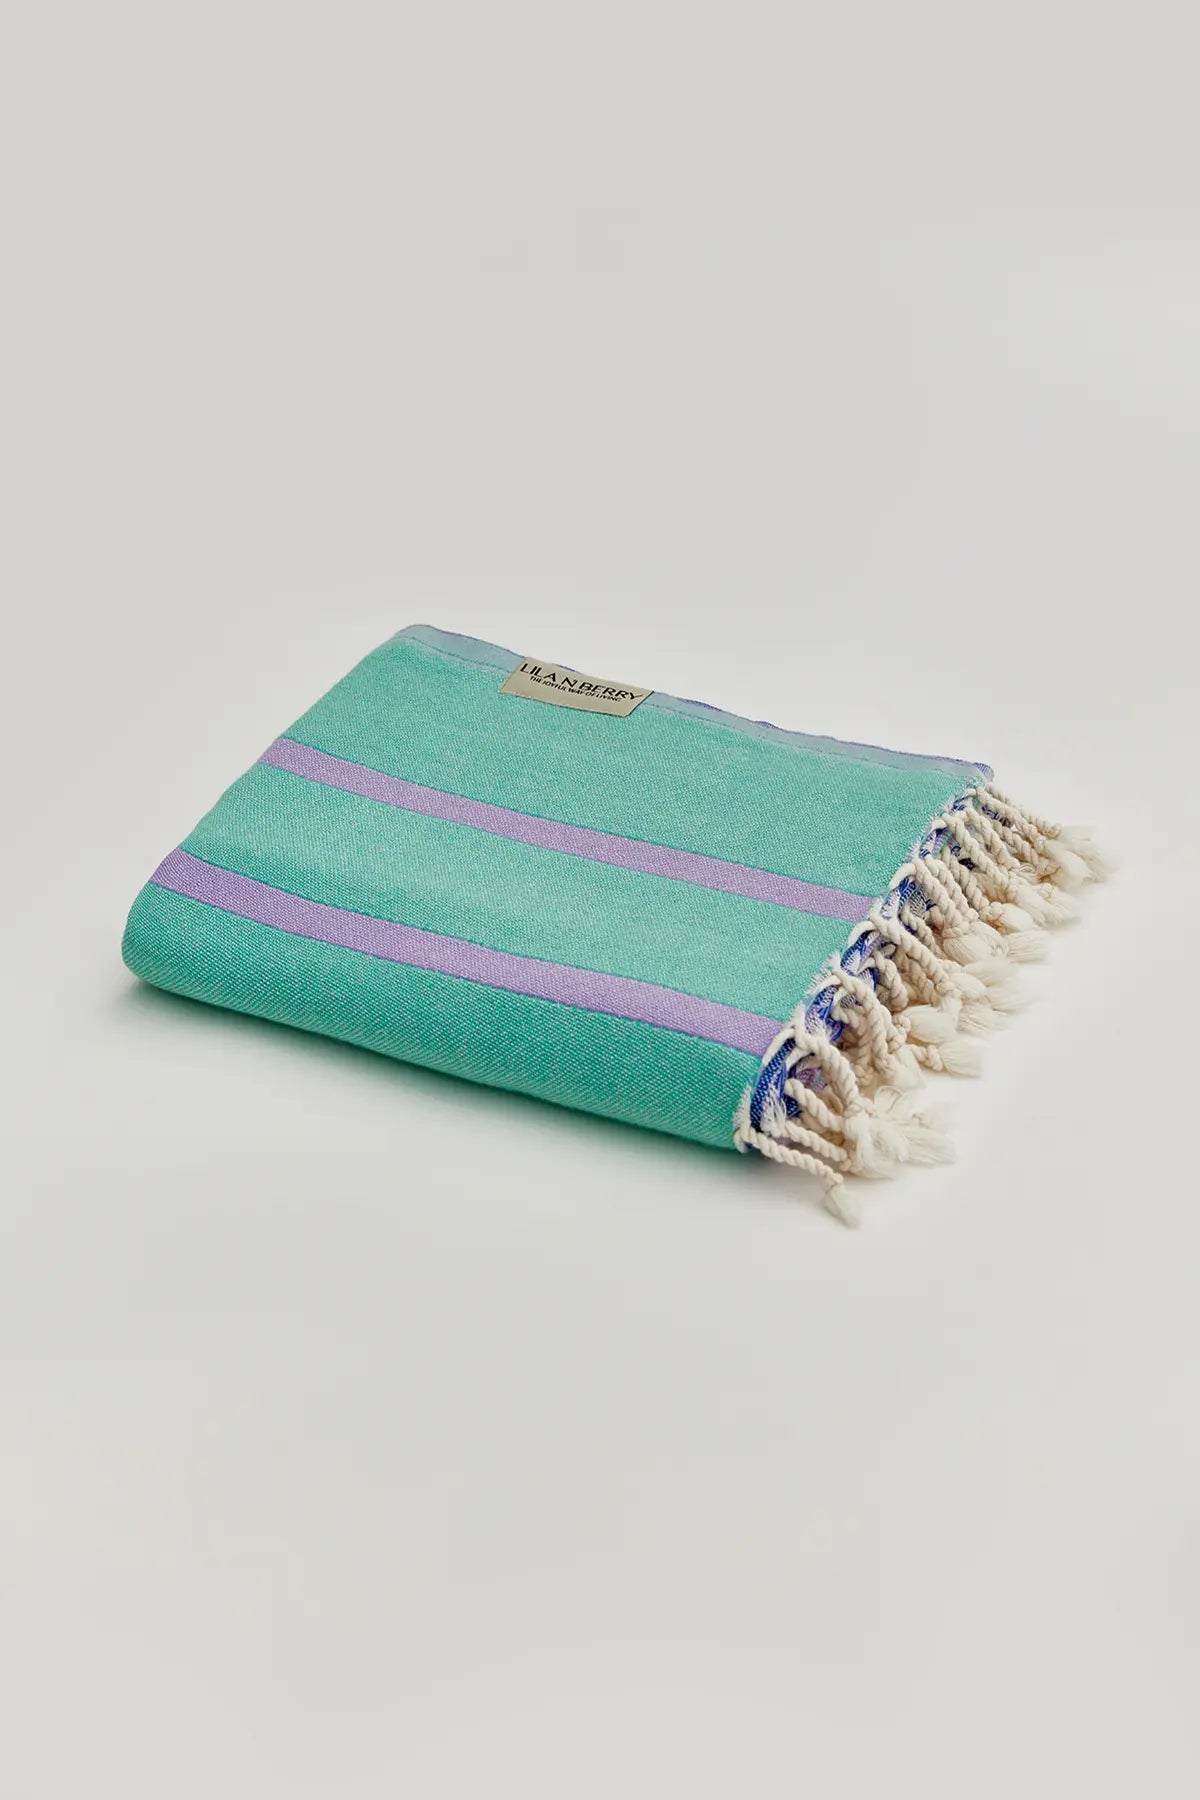 Beach/Bath,Lilac-Green,Turkish towel, folded,summer,line patterned,double-faces,purified sand,light,compact, easy pack,fun, recycled,double color